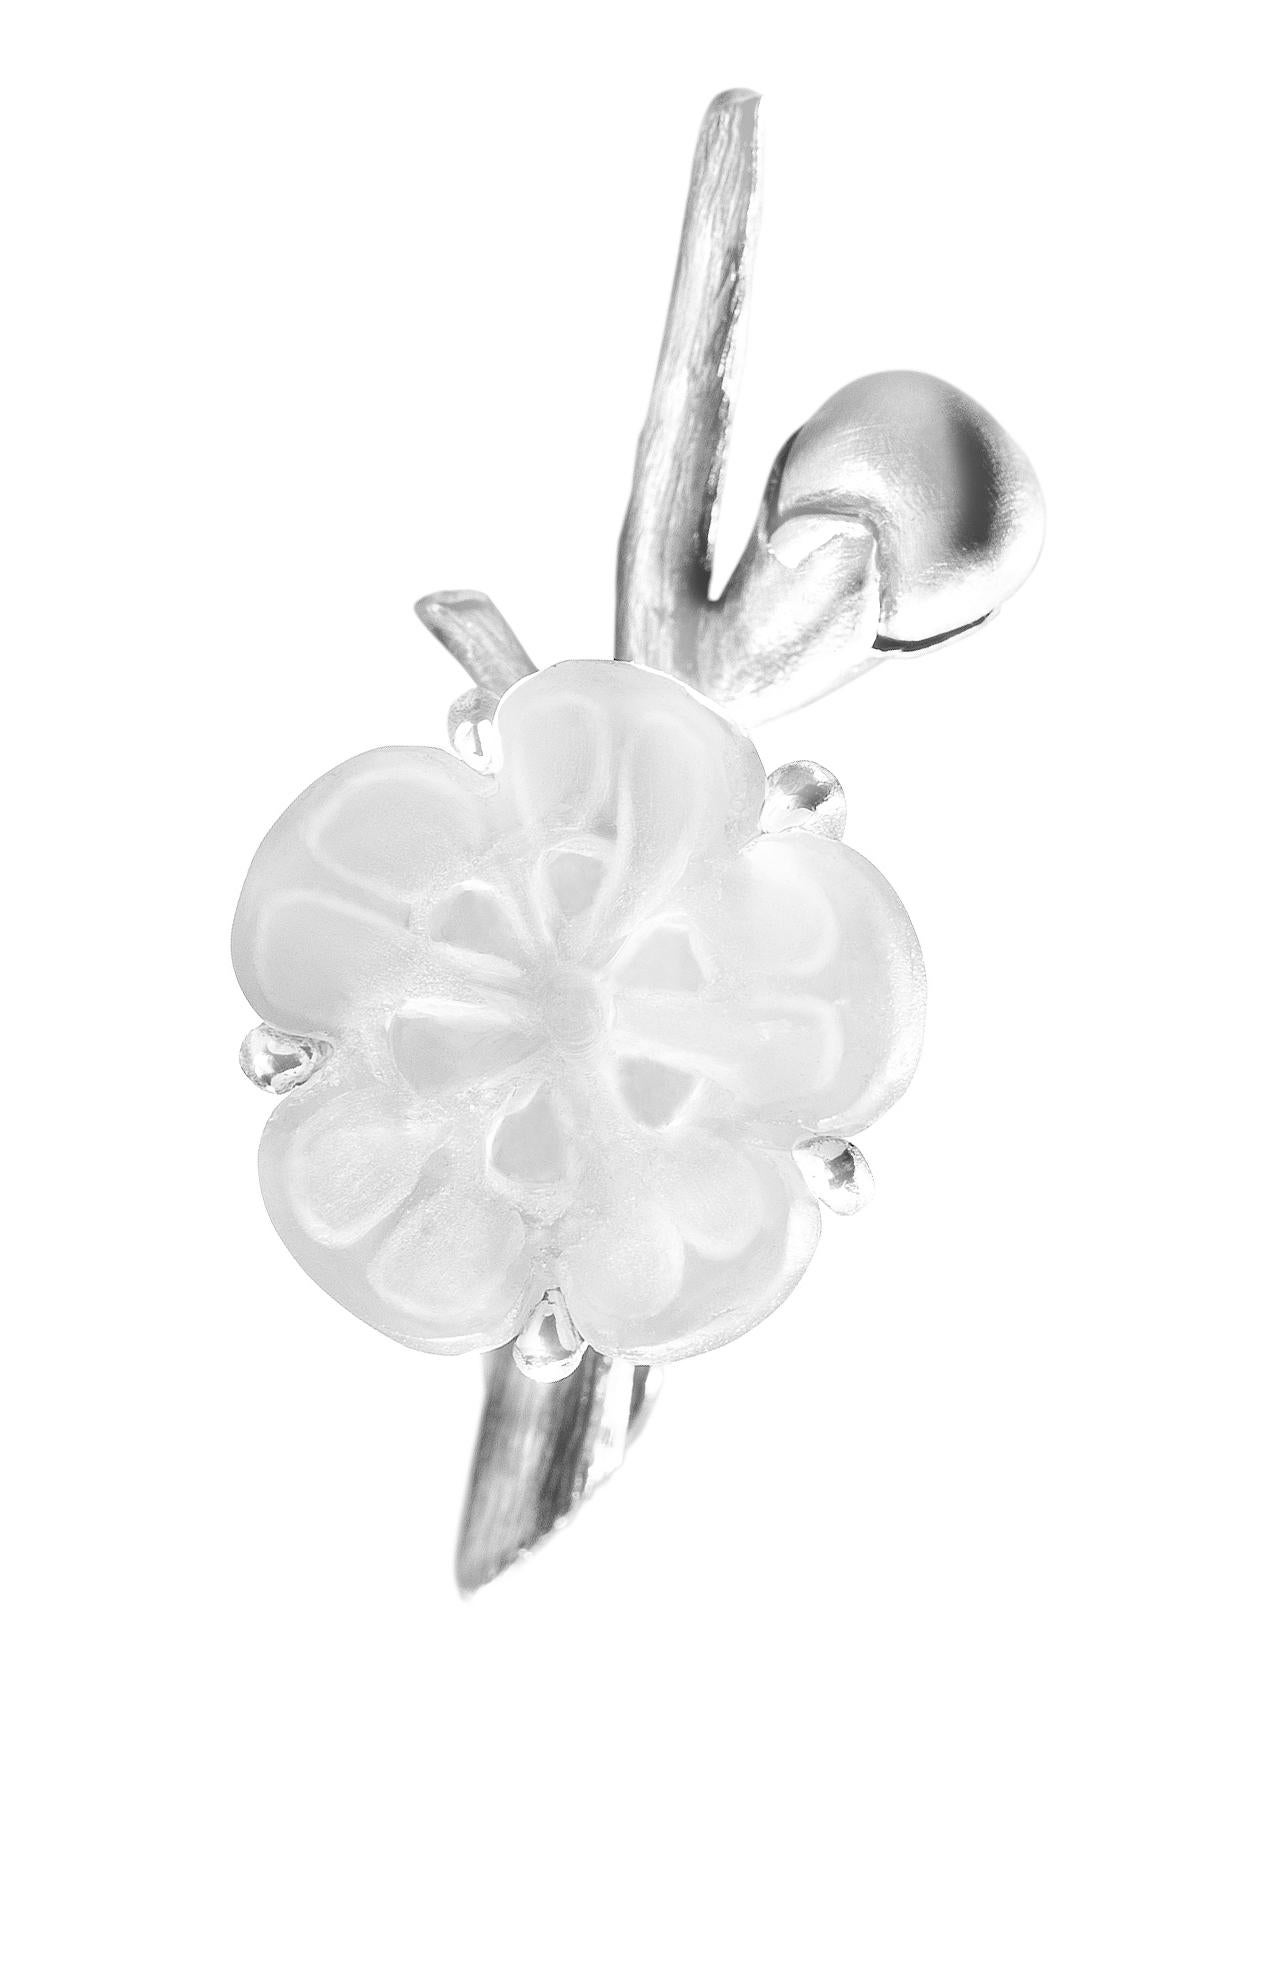 This contemporary Floral brooch from the Sakura collection is made of sterling silver and features a frosted cherry blossom crystal. The item was featured in Vogue UA magazine.

The brooch has a contemporary design and a romantic attitude. The